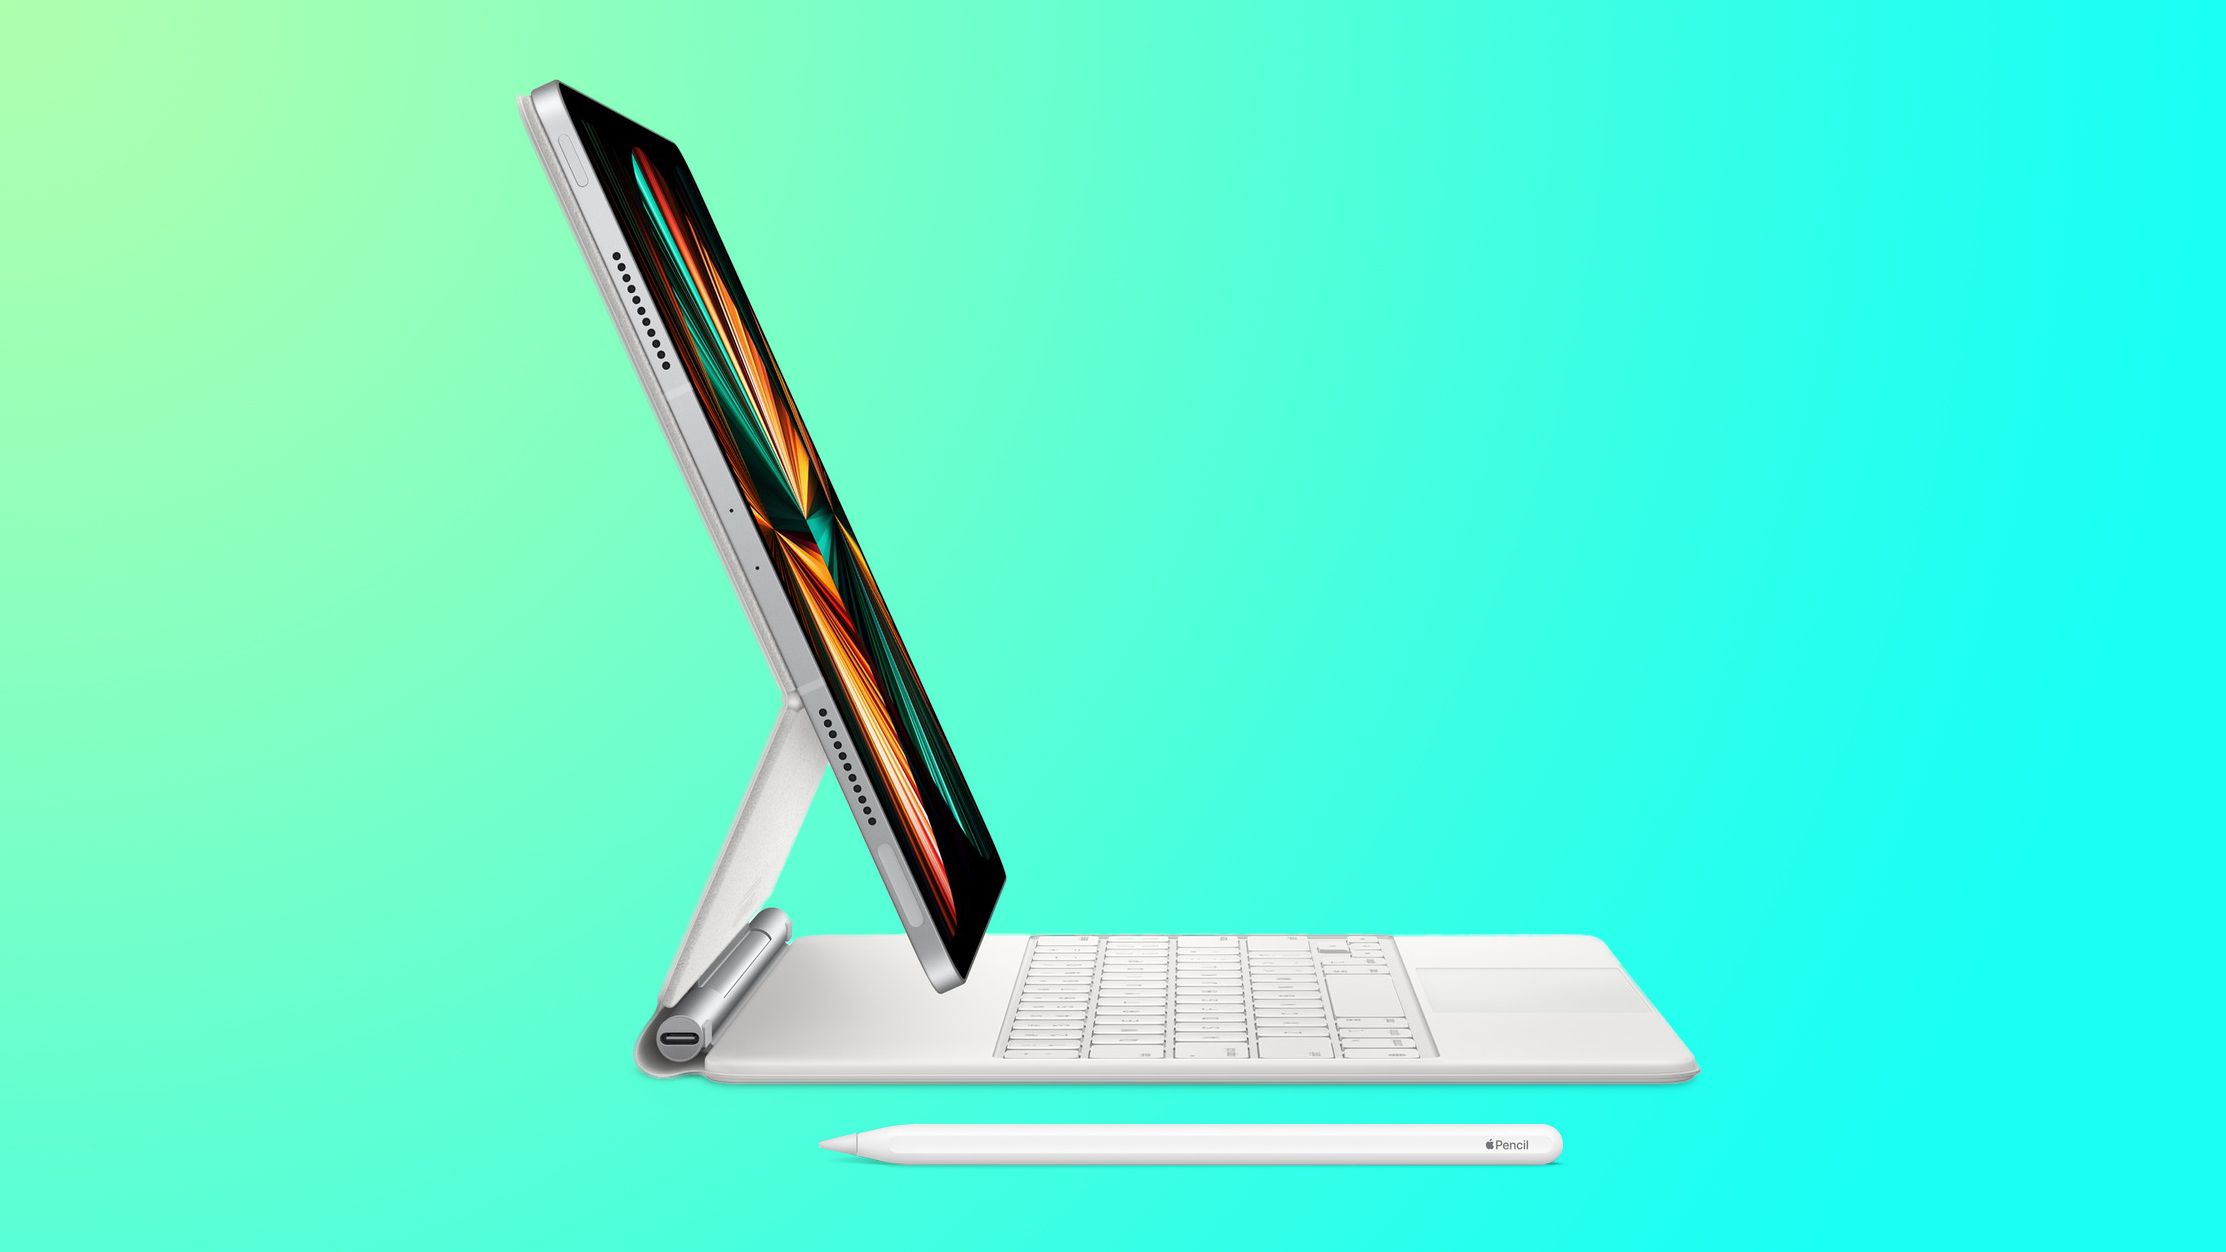 Deals: Get $128.70 Off When Bundling Apple Pencil 2 and 11-Inch